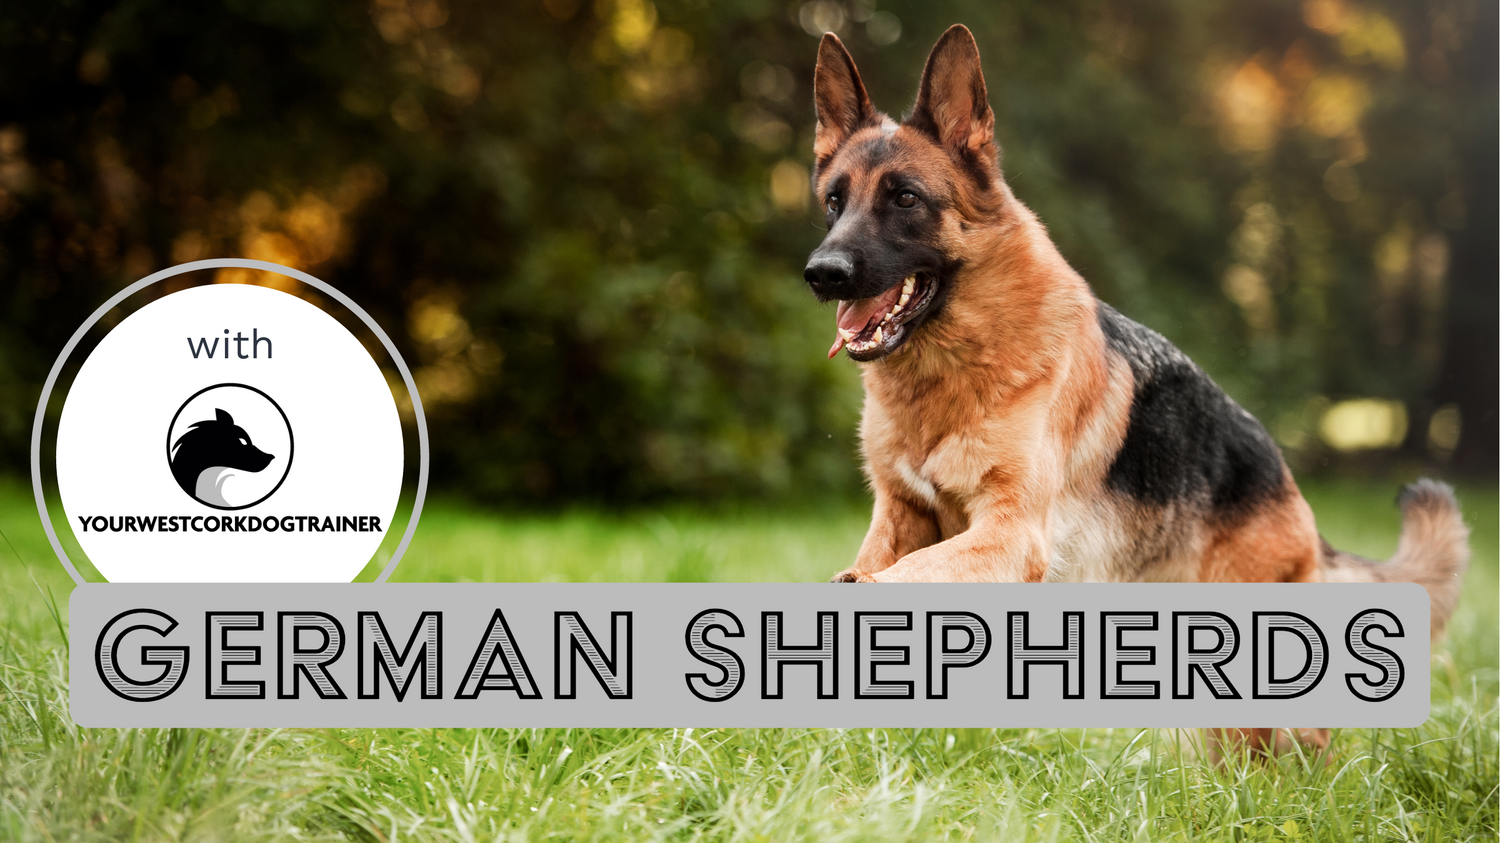 A German shepherd jumping through very high gras and a box with text “German Shepherds”